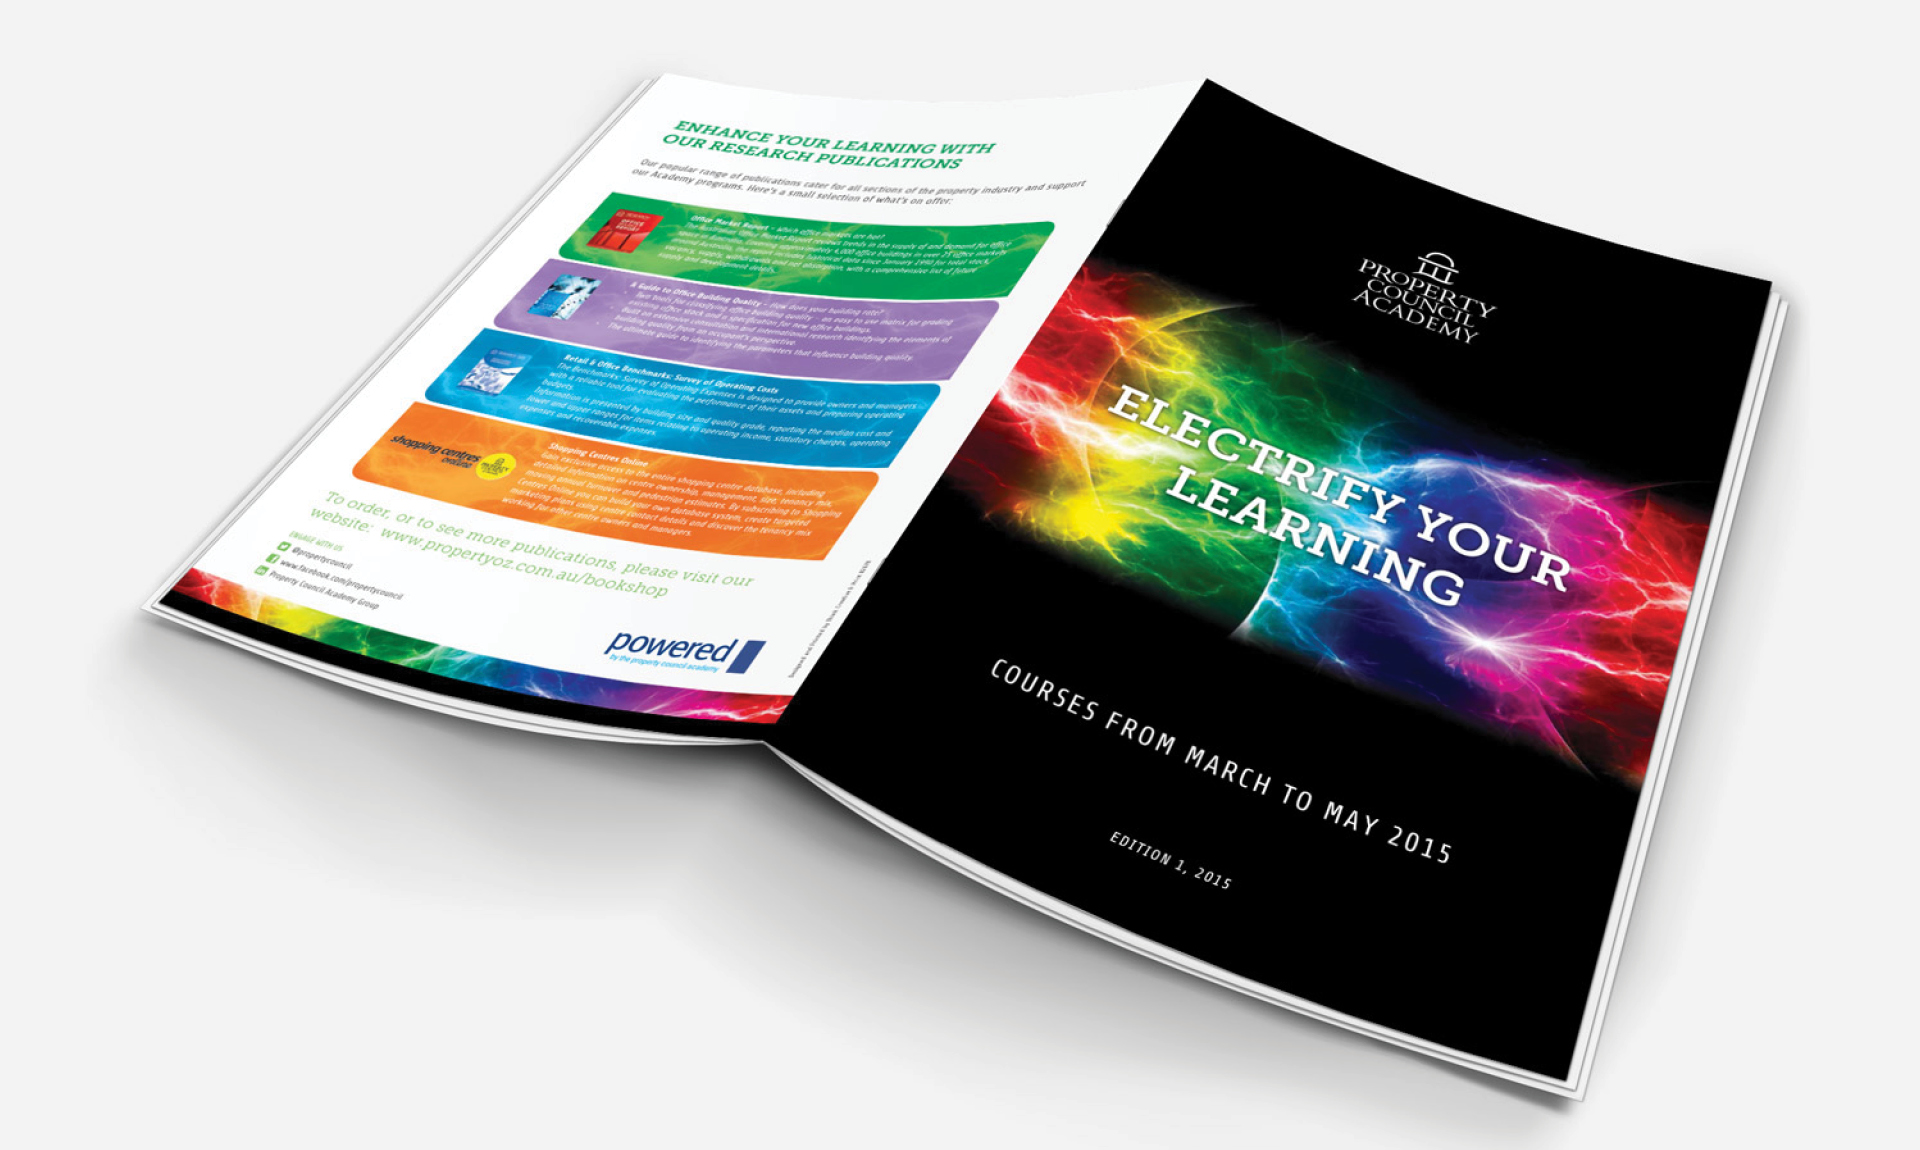 Property Council Academy Courses Collateral 2015 by Think Creative Agency3